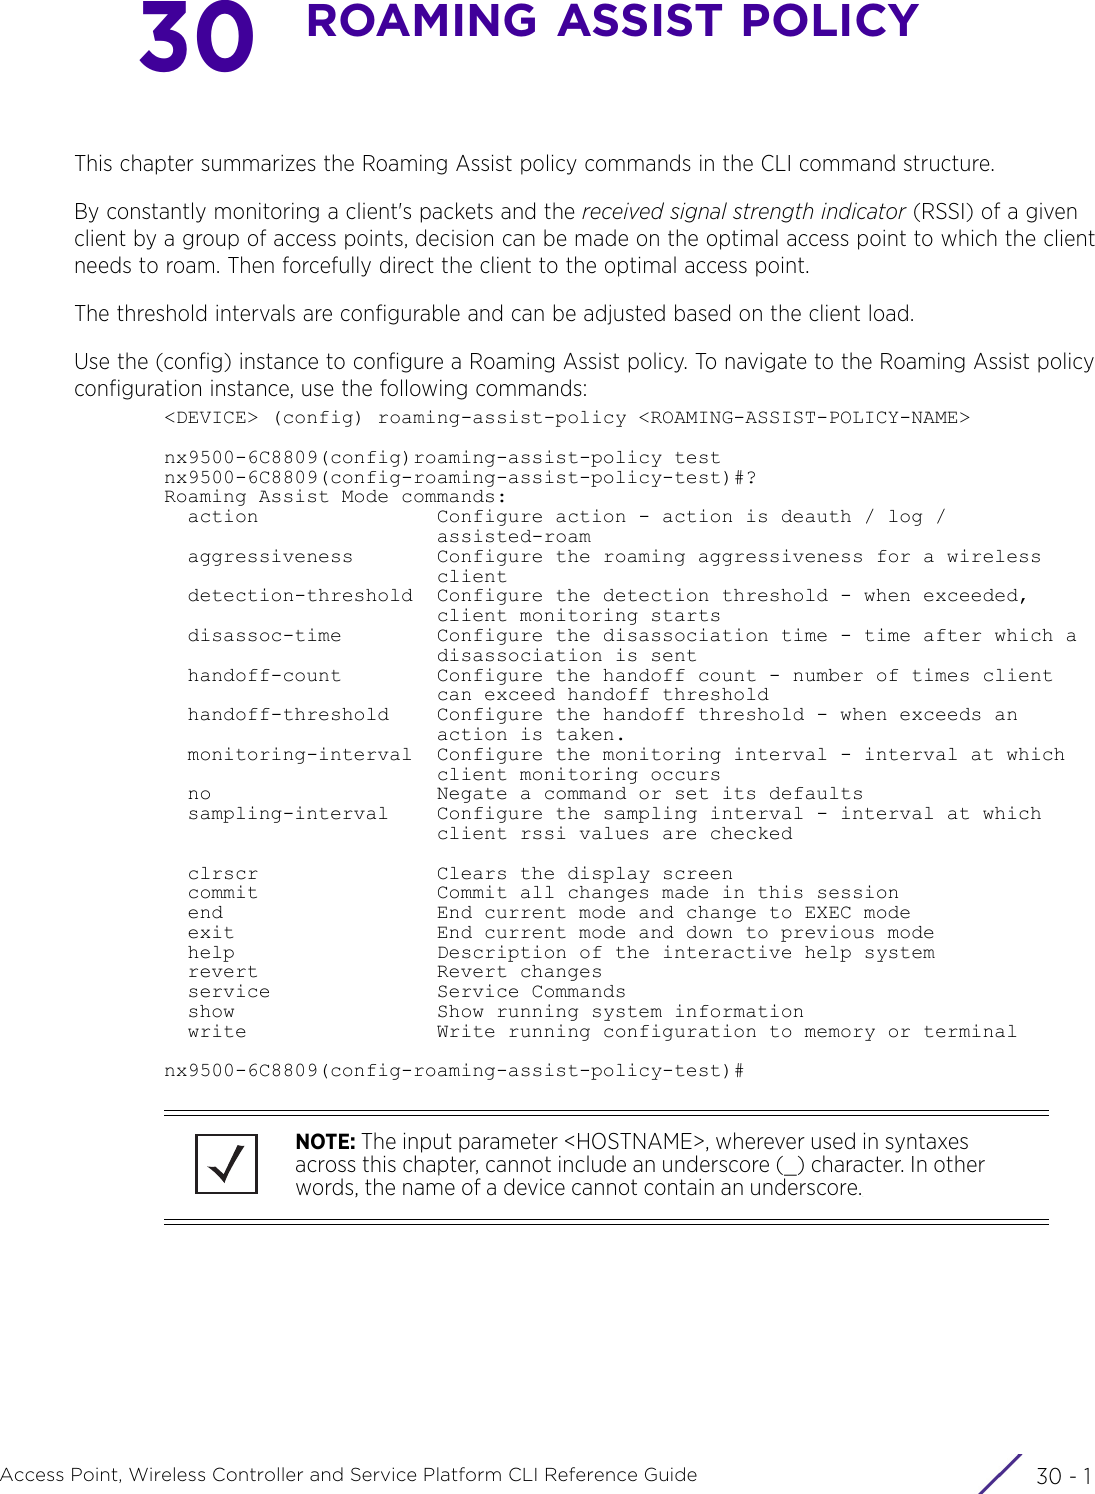 30 - 1Access Point, Wireless Controller and Service Platform CLI Reference Guide30ROAMING ASSIST POLICYThis chapter summarizes the Roaming Assist policy commands in the CLI command structure. By constantly monitoring a client&apos;s packets and the received signal strength indicator (RSSI) of a given client by a group of access points, decision can be made on the optimal access point to which the client needs to roam. Then forcefully direct the client to the optimal access point. The threshold intervals are configurable and can be adjusted based on the client load.Use the (config) instance to configure a Roaming Assist policy. To navigate to the Roaming Assist policy configuration instance, use the following commands:&lt;DEVICE&gt; (config) roaming-assist-policy &lt;ROAMING-ASSIST-POLICY-NAME&gt;nx9500-6C8809(config)roaming-assist-policy testnx9500-6C8809(config-roaming-assist-policy-test)#?Roaming Assist Mode commands:  action               Configure action - action is deauth / log /                       assisted-roam  aggressiveness       Configure the roaming aggressiveness for a wireless                       client  detection-threshold  Configure the detection threshold - when exceeded,                       client monitoring starts  disassoc-time        Configure the disassociation time - time after which a                       disassociation is sent  handoff-count        Configure the handoff count - number of times client                       can exceed handoff threshold  handoff-threshold    Configure the handoff threshold - when exceeds an                       action is taken.  monitoring-interval  Configure the monitoring interval - interval at which                       client monitoring occurs  no                   Negate a command or set its defaults  sampling-interval    Configure the sampling interval - interval at which                       client rssi values are checked  clrscr               Clears the display screen  commit               Commit all changes made in this session  end                  End current mode and change to EXEC mode  exit                 End current mode and down to previous mode  help                 Description of the interactive help system  revert               Revert changes  service              Service Commands  show                 Show running system information  write                Write running configuration to memory or terminalnx9500-6C8809(config-roaming-assist-policy-test)#NOTE: The input parameter &lt;HOSTNAME&gt;, wherever used in syntaxes across this chapter, cannot include an underscore (_) character. In other words, the name of a device cannot contain an underscore.